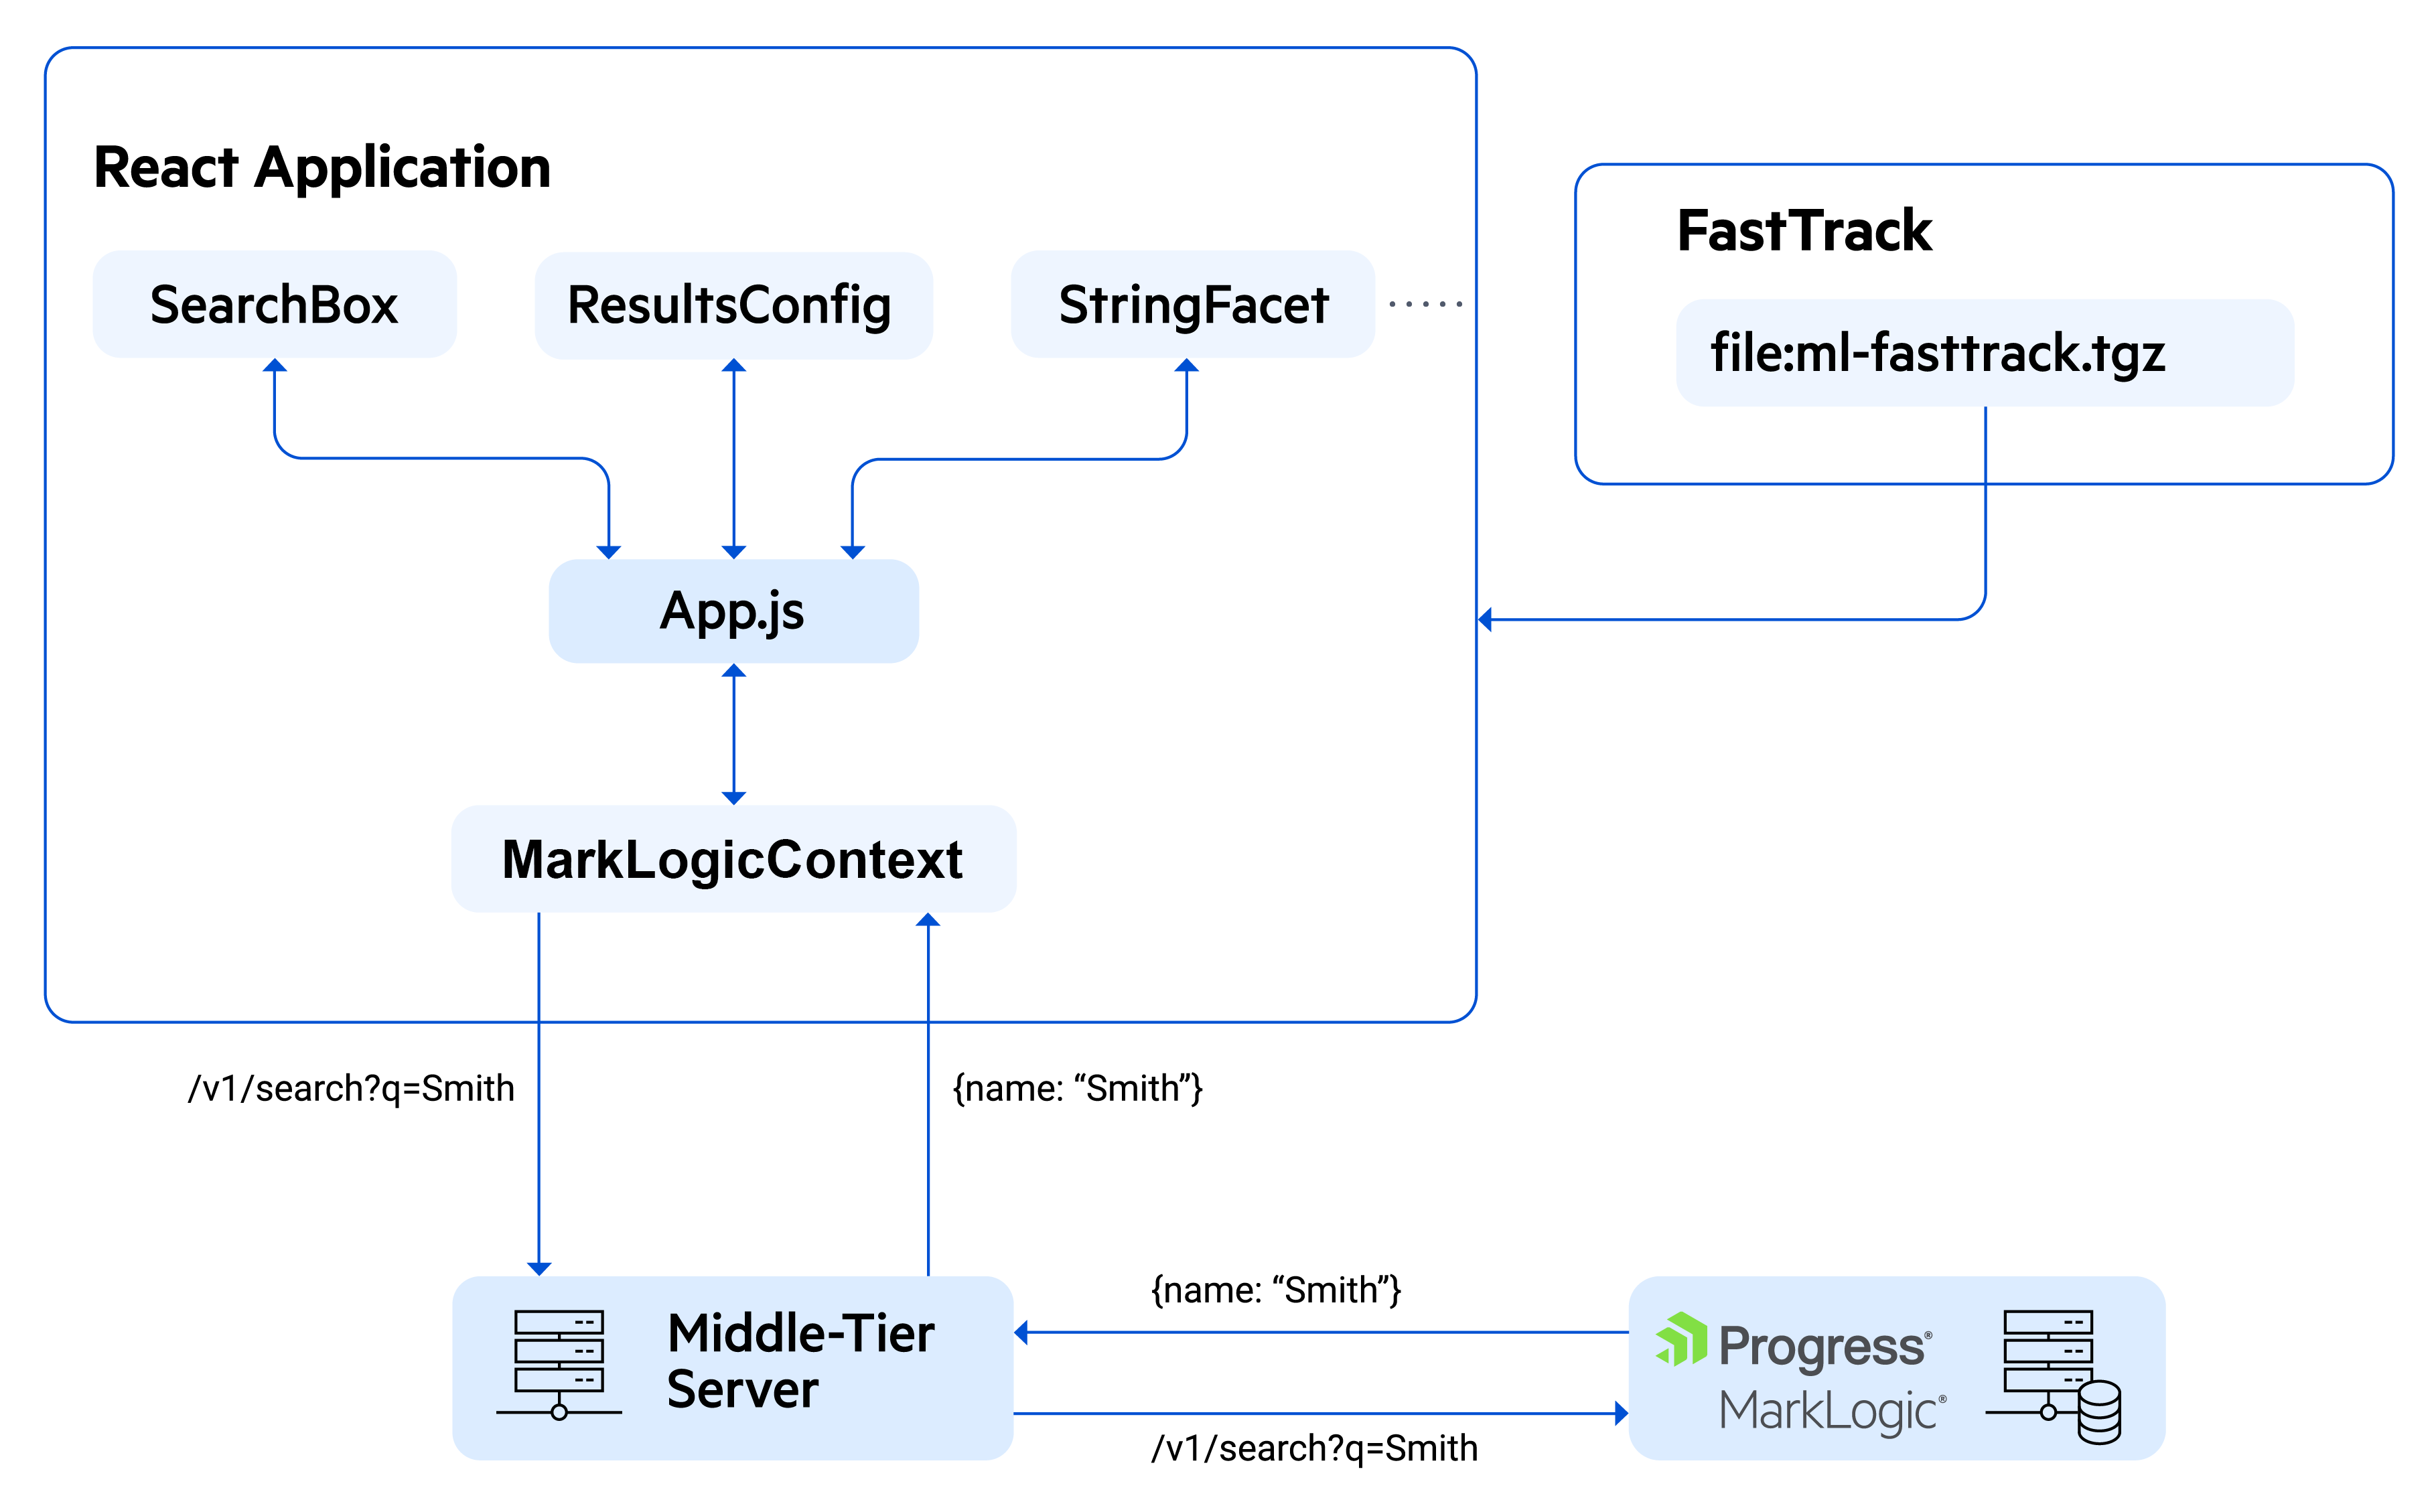 Architecture of a FastTrack enabled React application